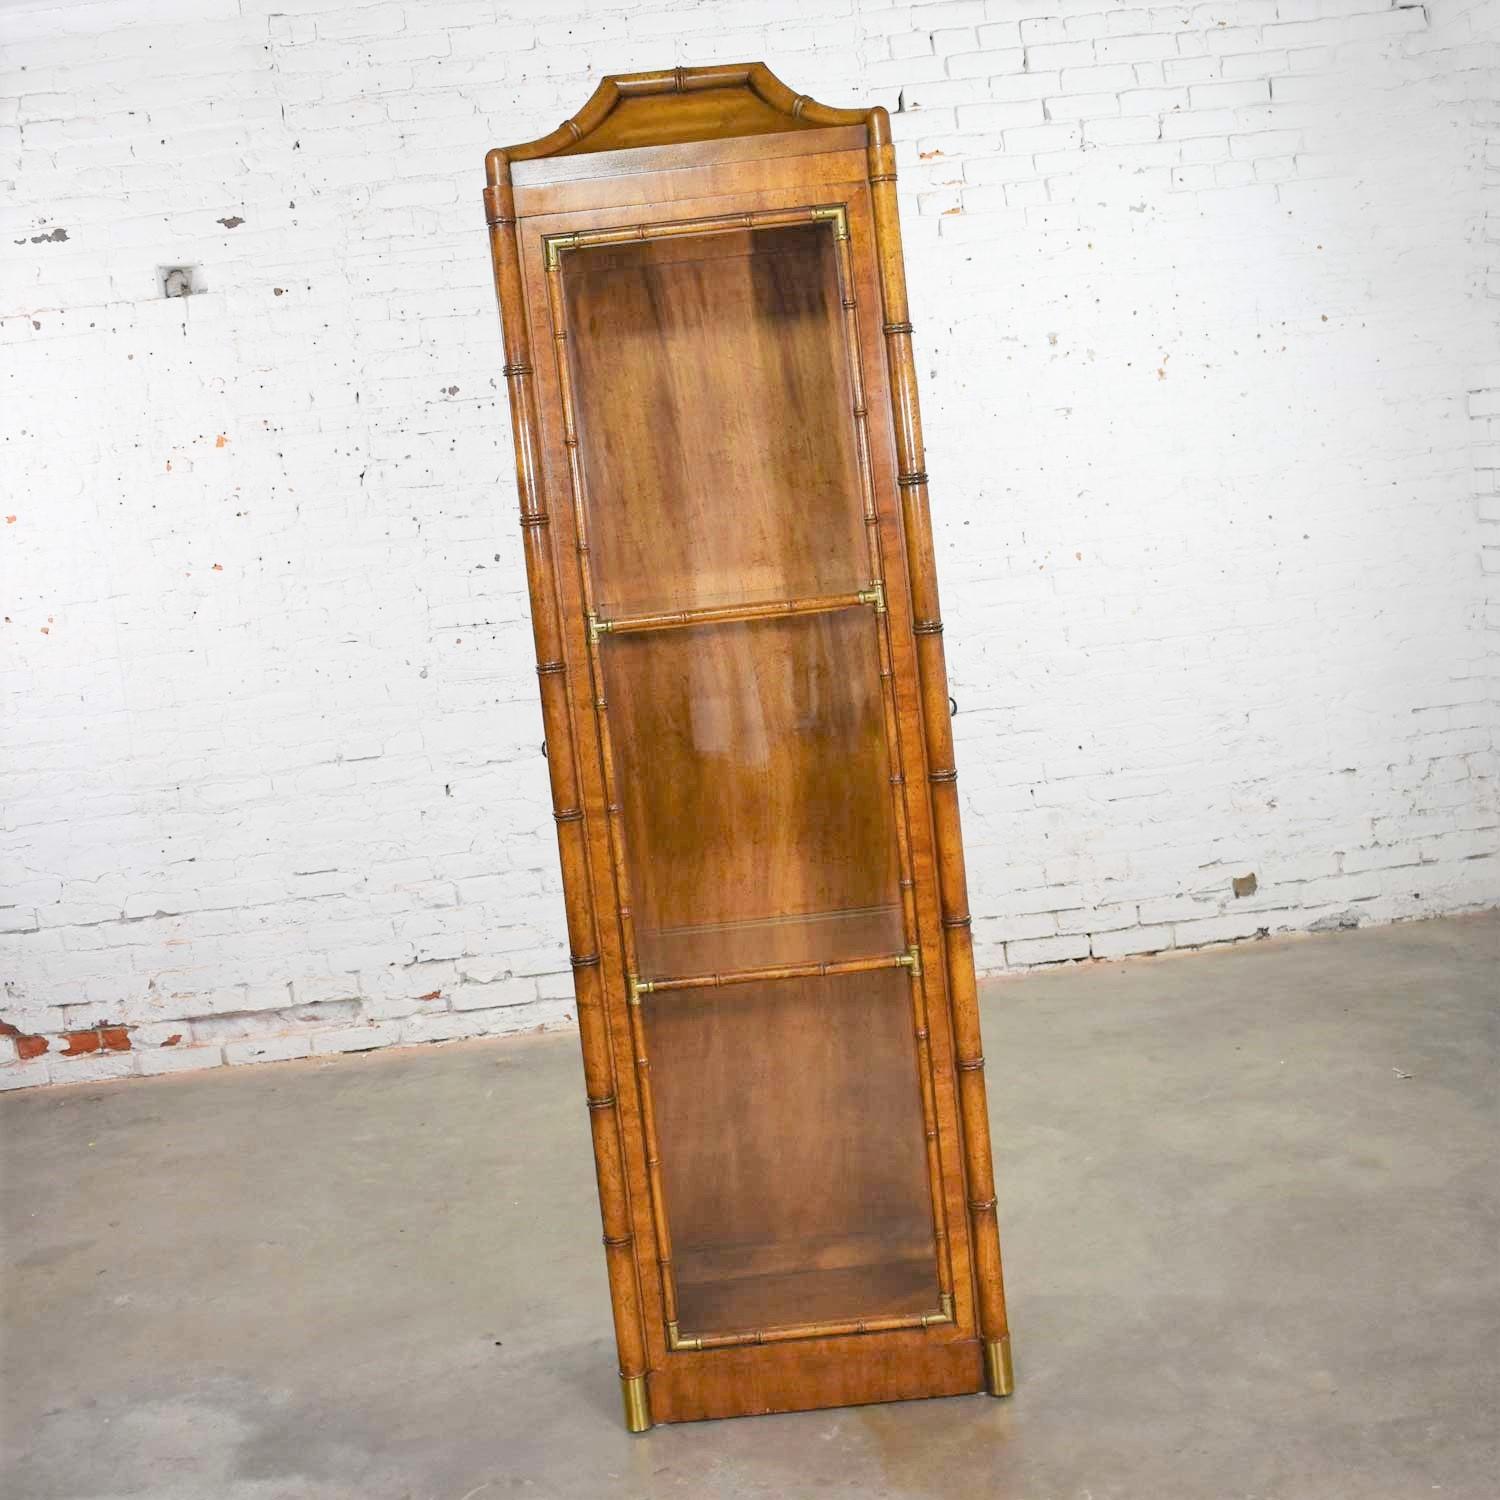 Handsome narrow lighted display cabinet in a Hollywood Regency Campaign faux bamboo style by Weiman. It is in incredible vintage condition with no outstanding flaws. Please see photos, circa 1970s.

This is the second cabinet like this we have had